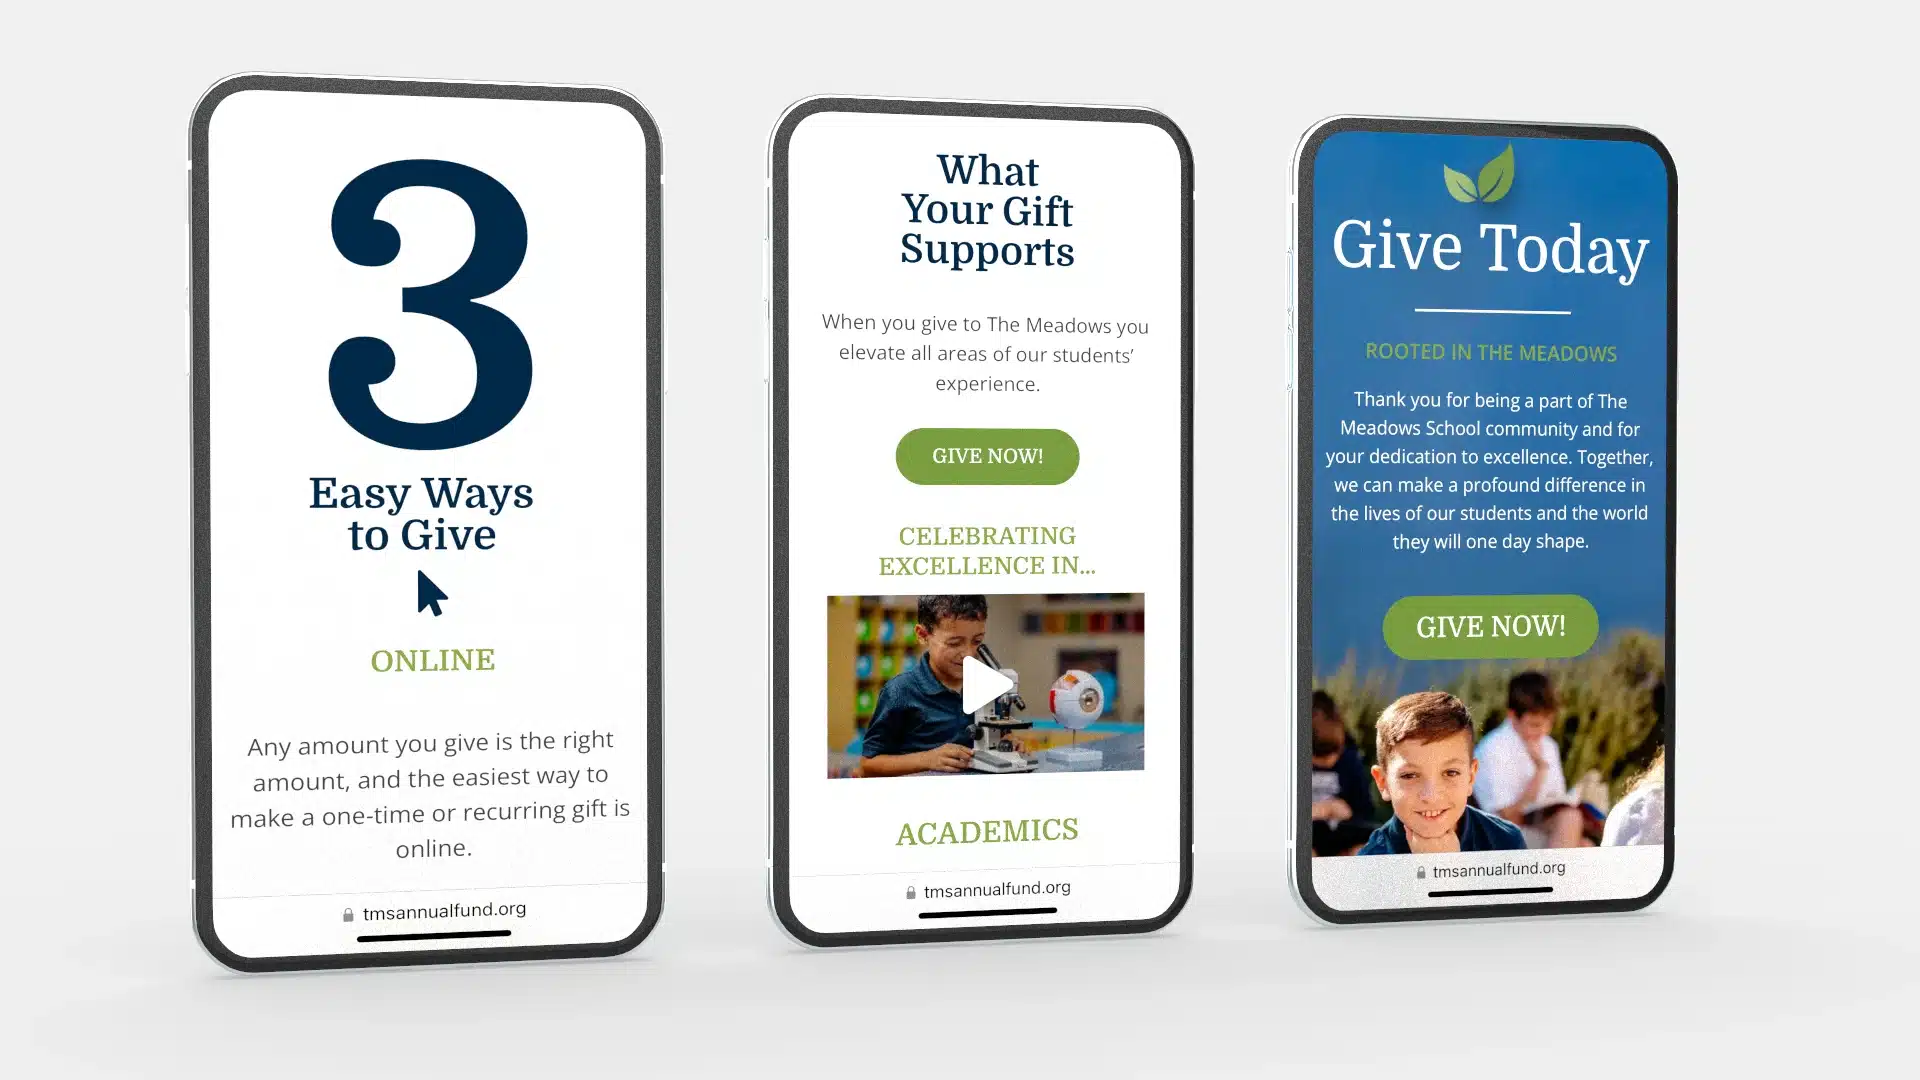 The Meadows School Fundraising Campaign website on smart phones